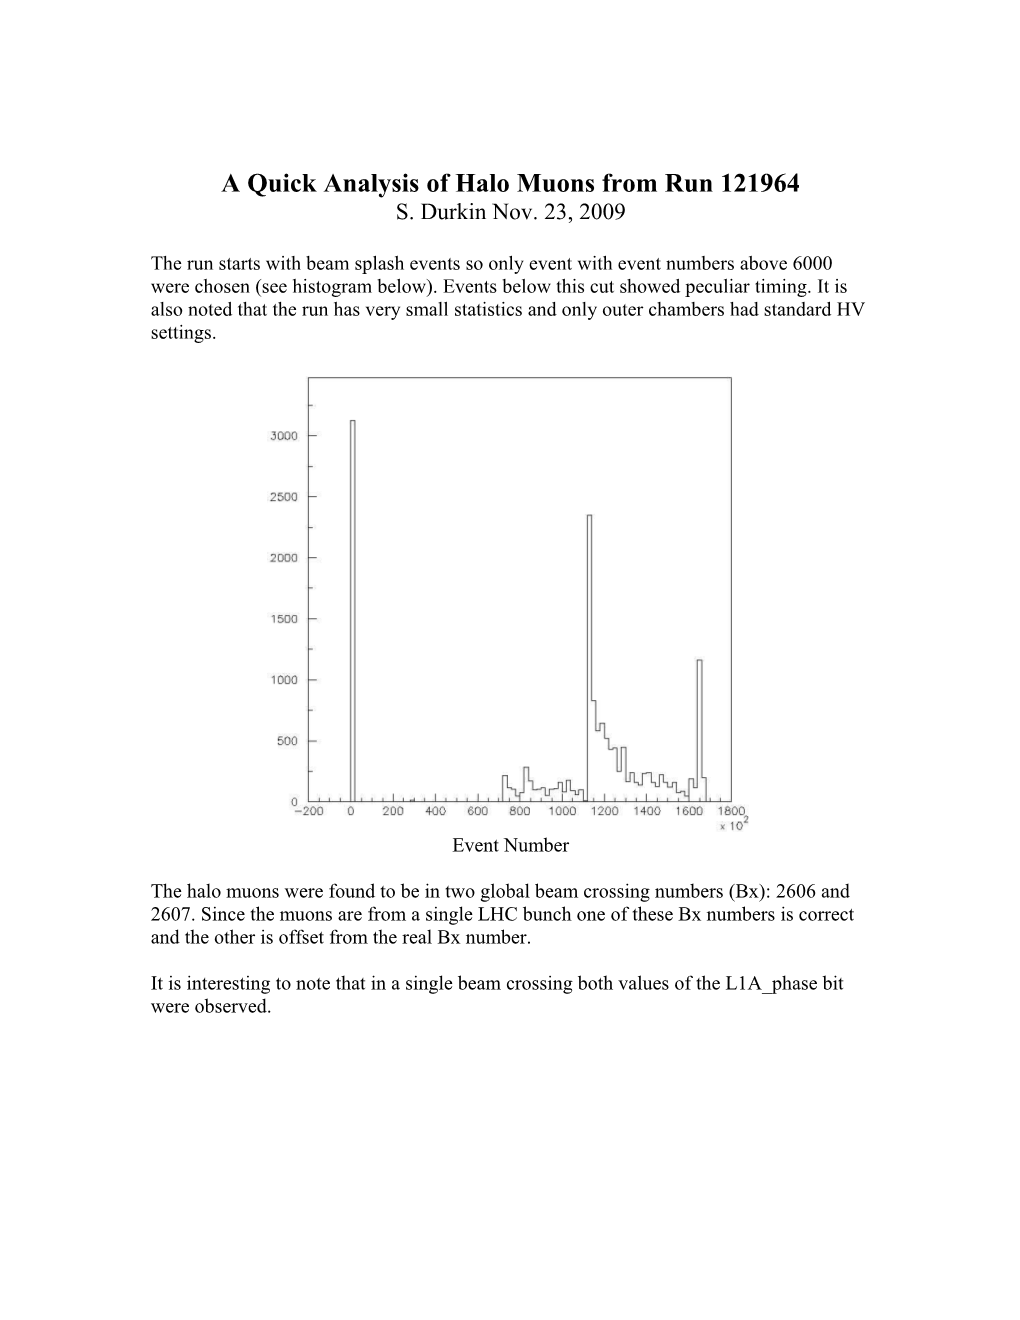 A Quick Analysis of Halo Muons from Run 121964